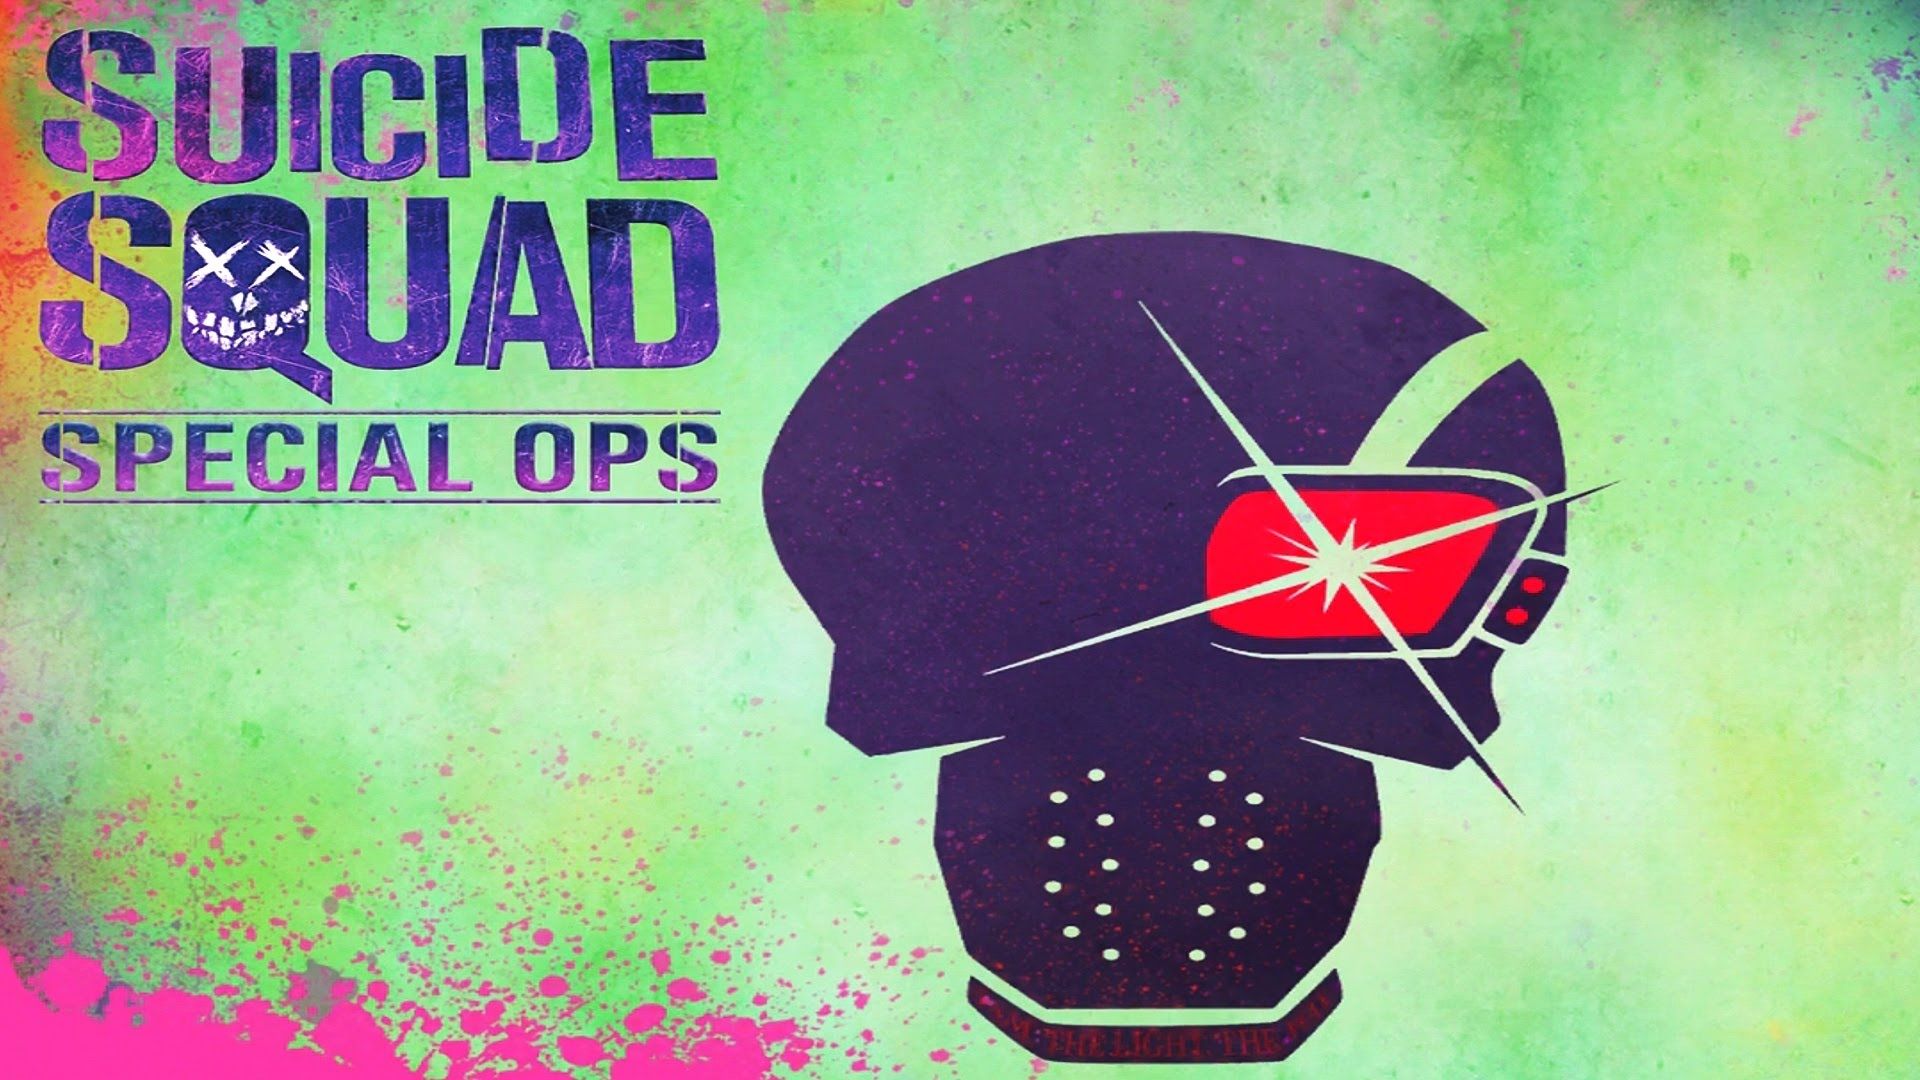 Suicide squad ops. Suicide Squad: Special ops. Suicide Squad: Special ops IOS. Обои 89 Squad. Suicide Squad spec ops.